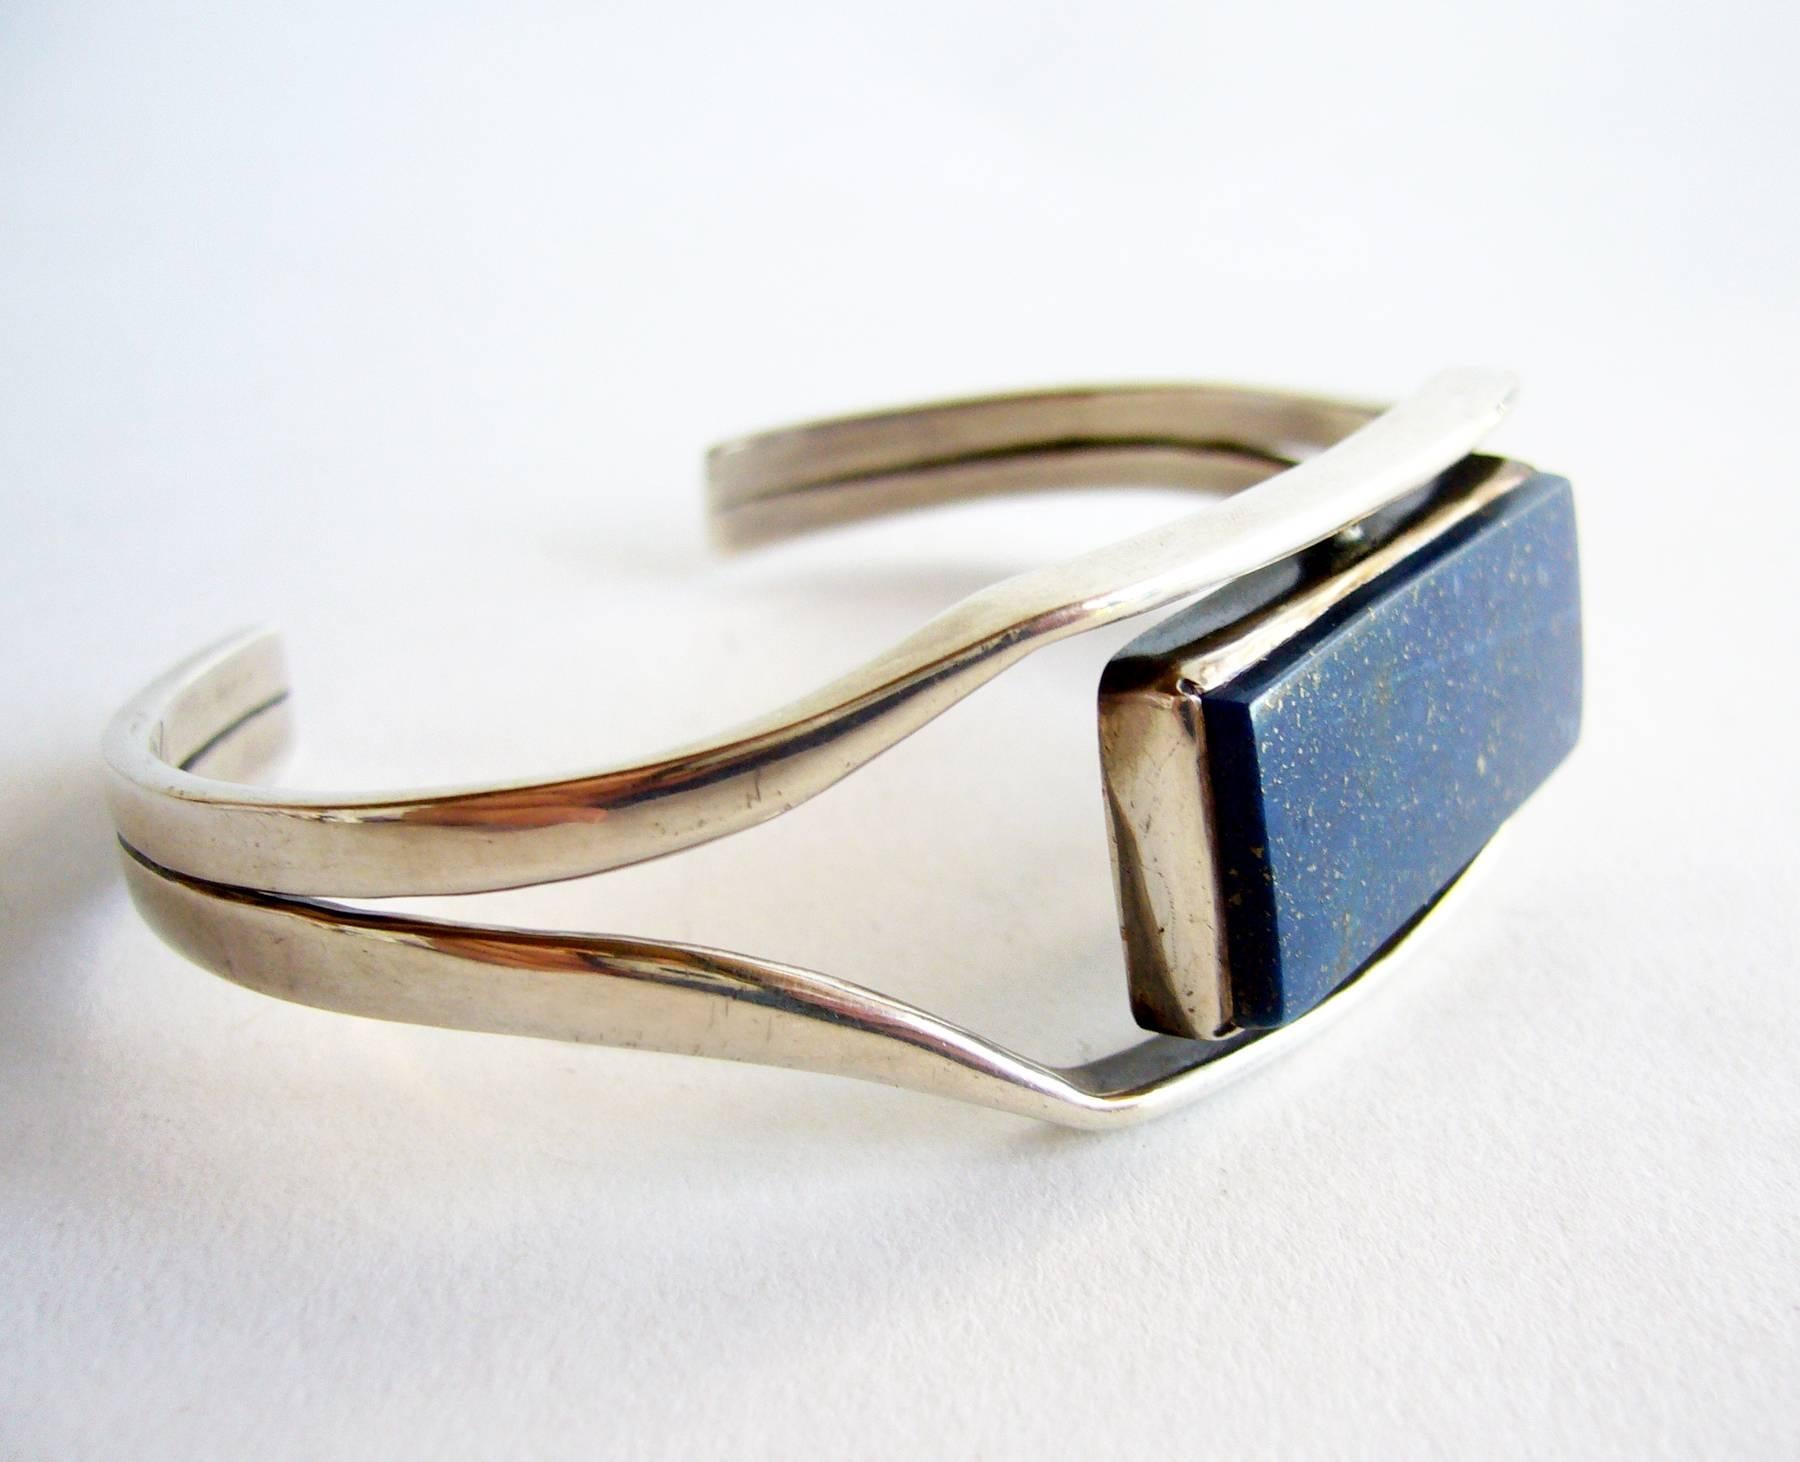 Sterling silver and lapis lazuli cuff bracelet created by Jack Nutting of San Francisco, California.  Bracelet has a wearable wrist length of 8.5